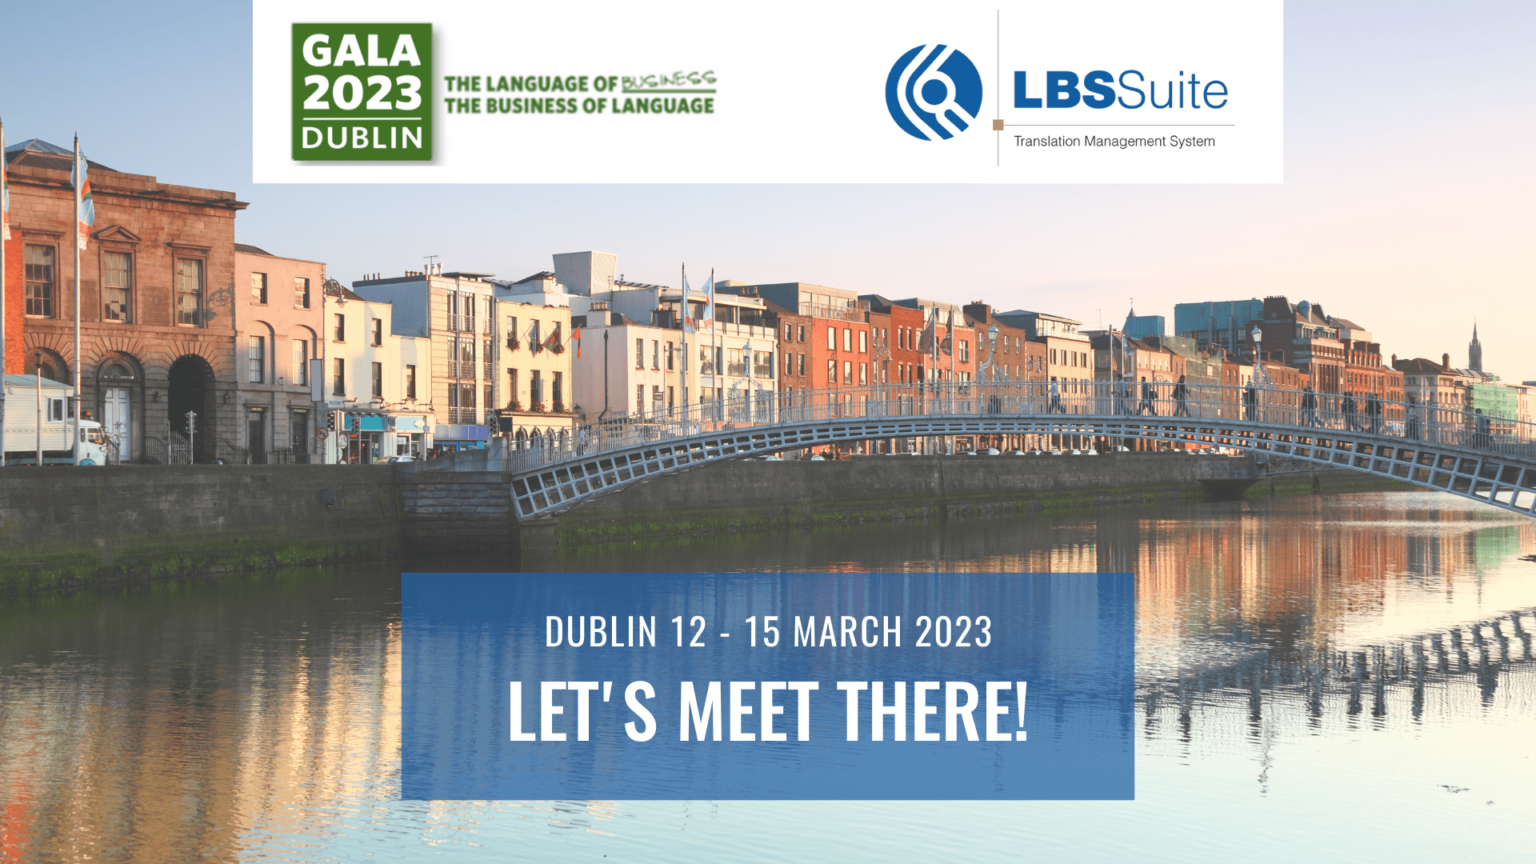 We'll be at GALA 2023 in Dublin! LBS Suite